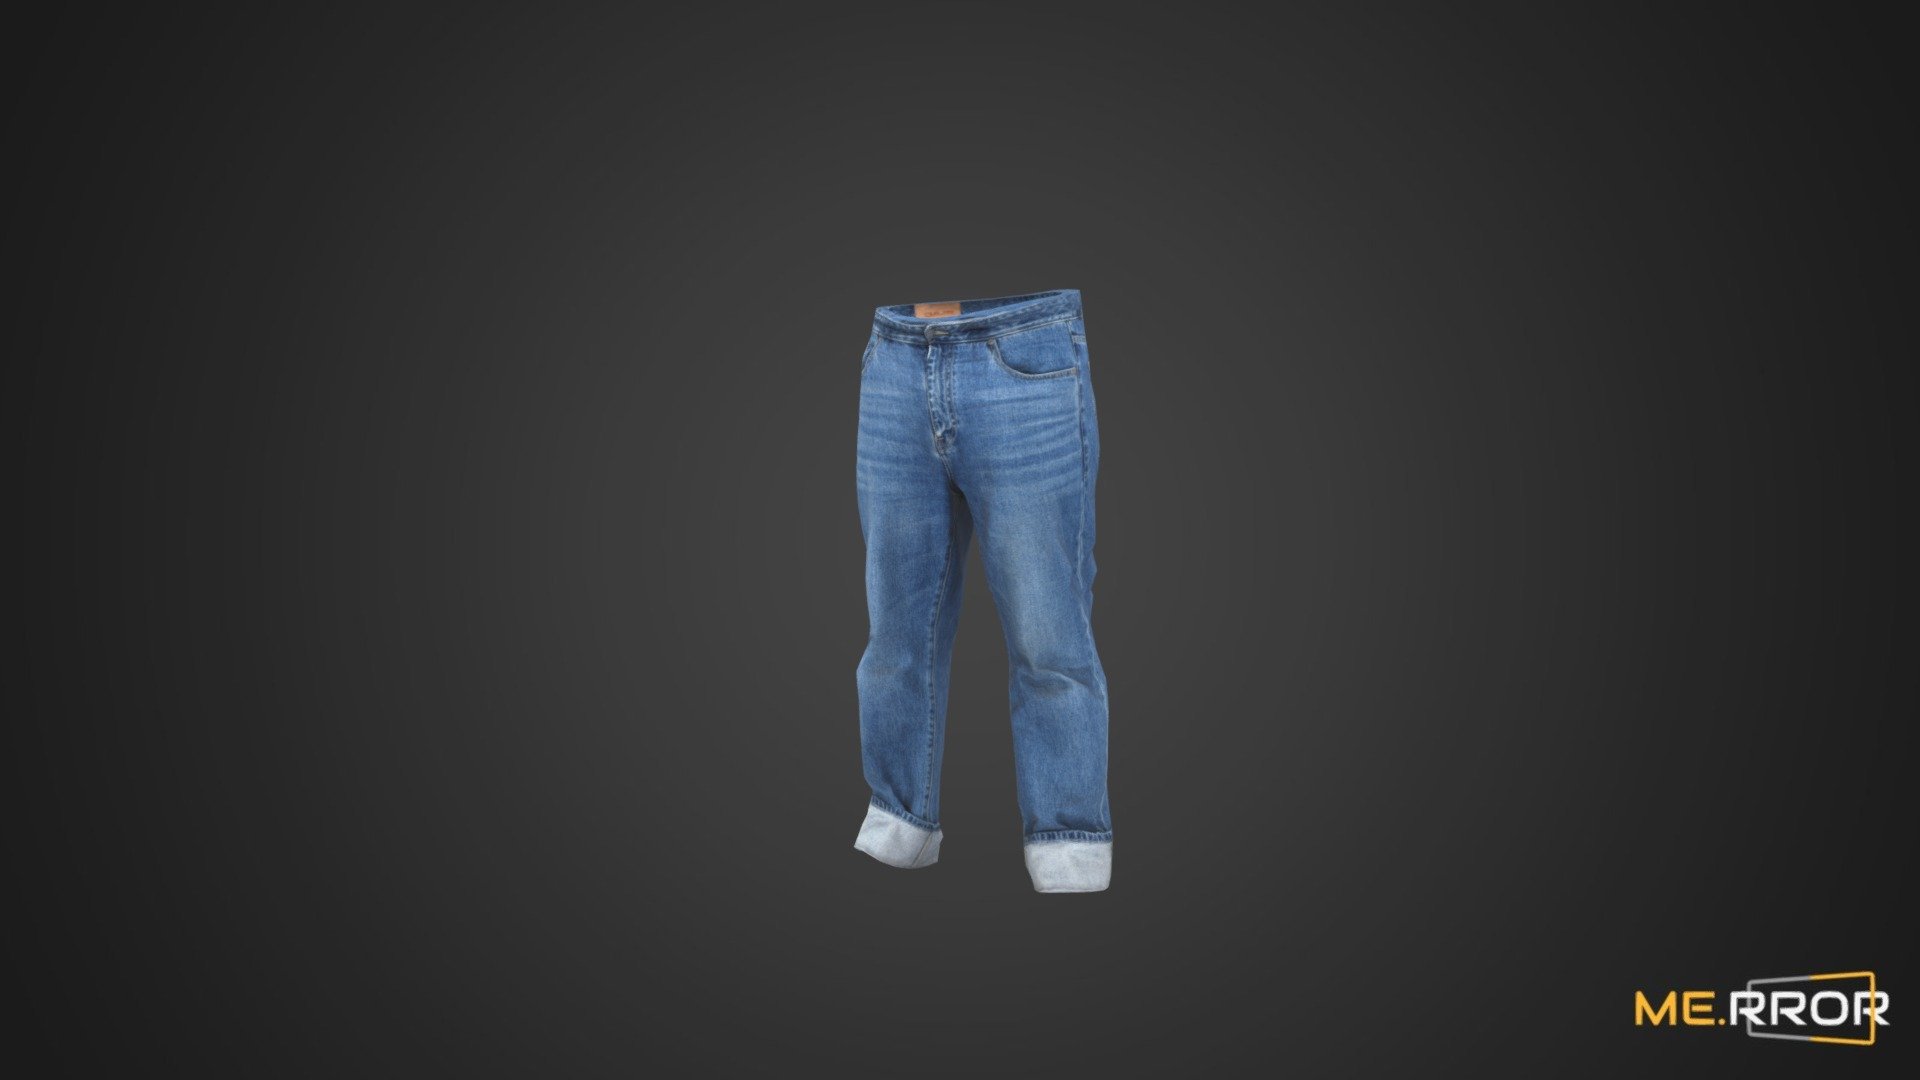 MERROR is a 3D Content PLATFORM which introduces various Asian assets to the 3D world


3DScanning #Photogrametry #ME.RROR - [Game-Ready] Rollup Jean - Buy Royalty Free 3D model by ME.RROR (@merror) 3d model